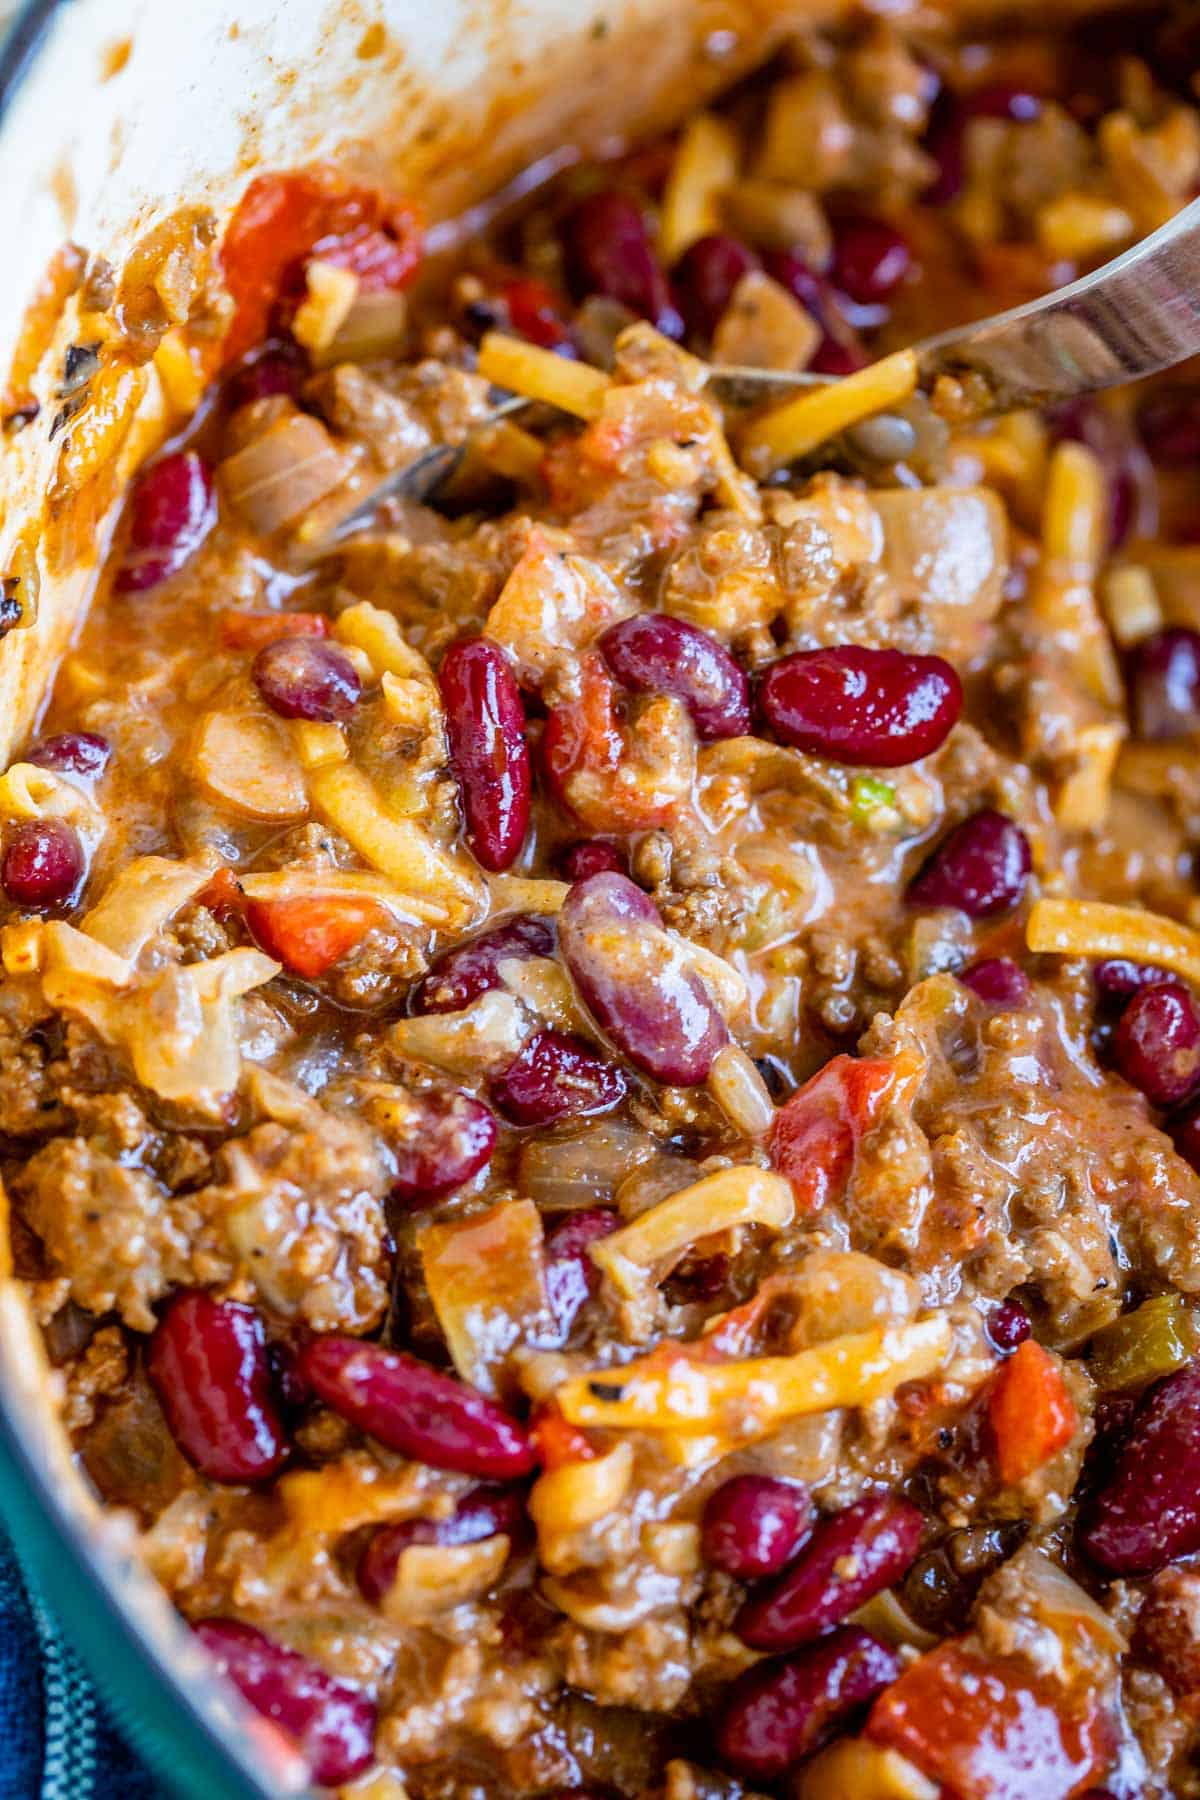 Quick and Easy Chili Recipe (45 Minutes!) from The Food Charlatan